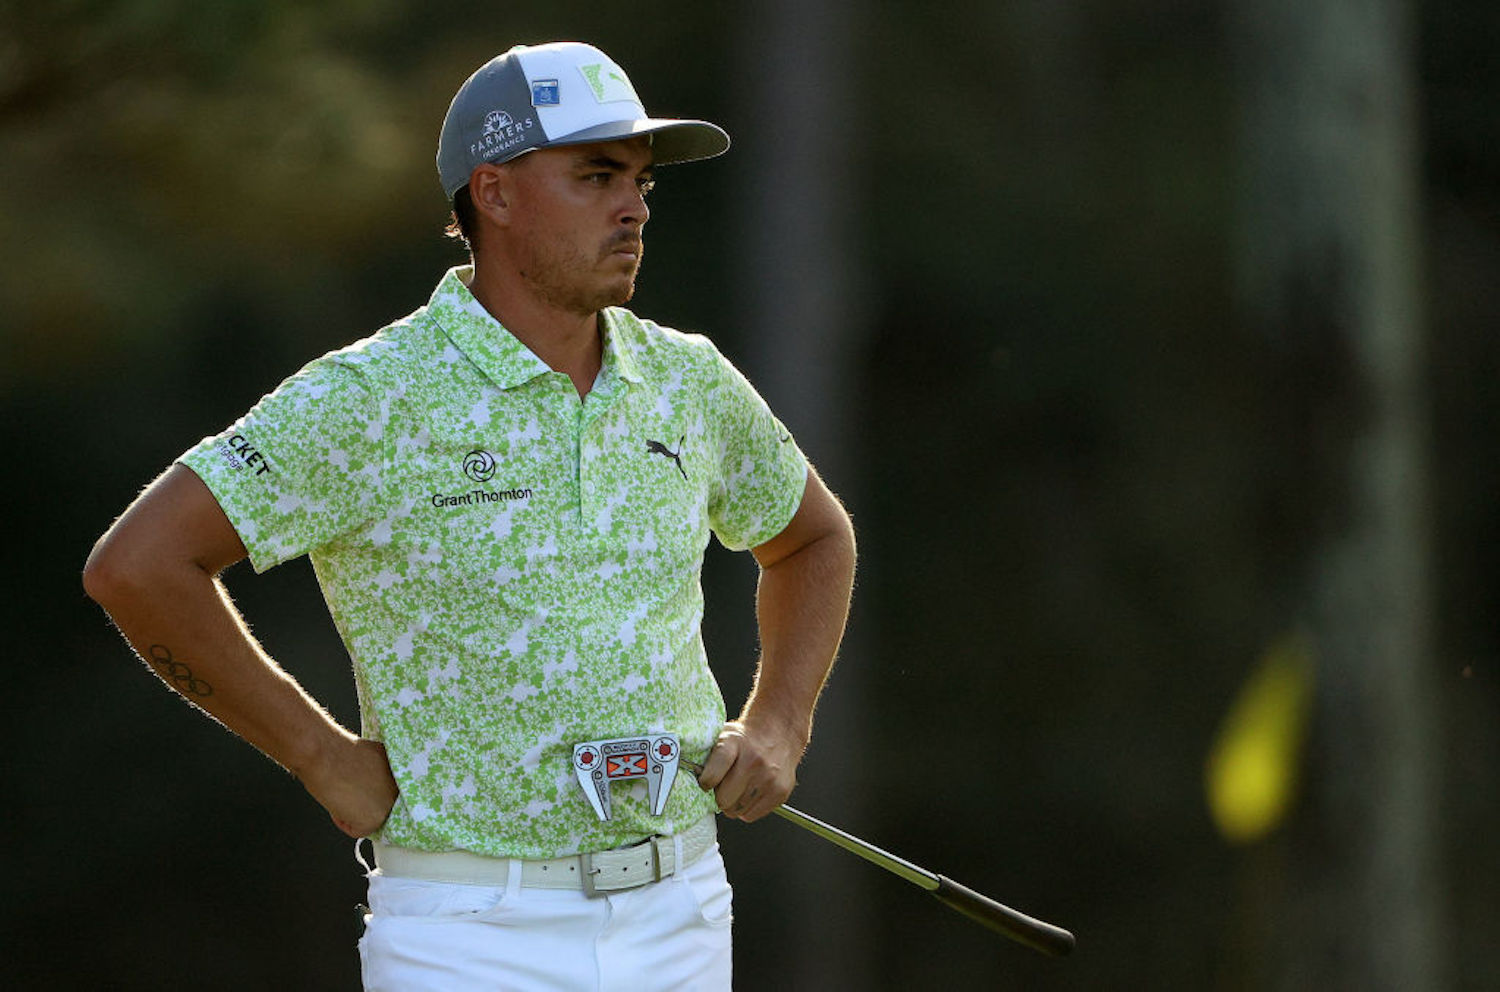 Rickie Fowler has been one of the most consistent performers at The Masters for years, but he might not qualify for the tournament in 2021.